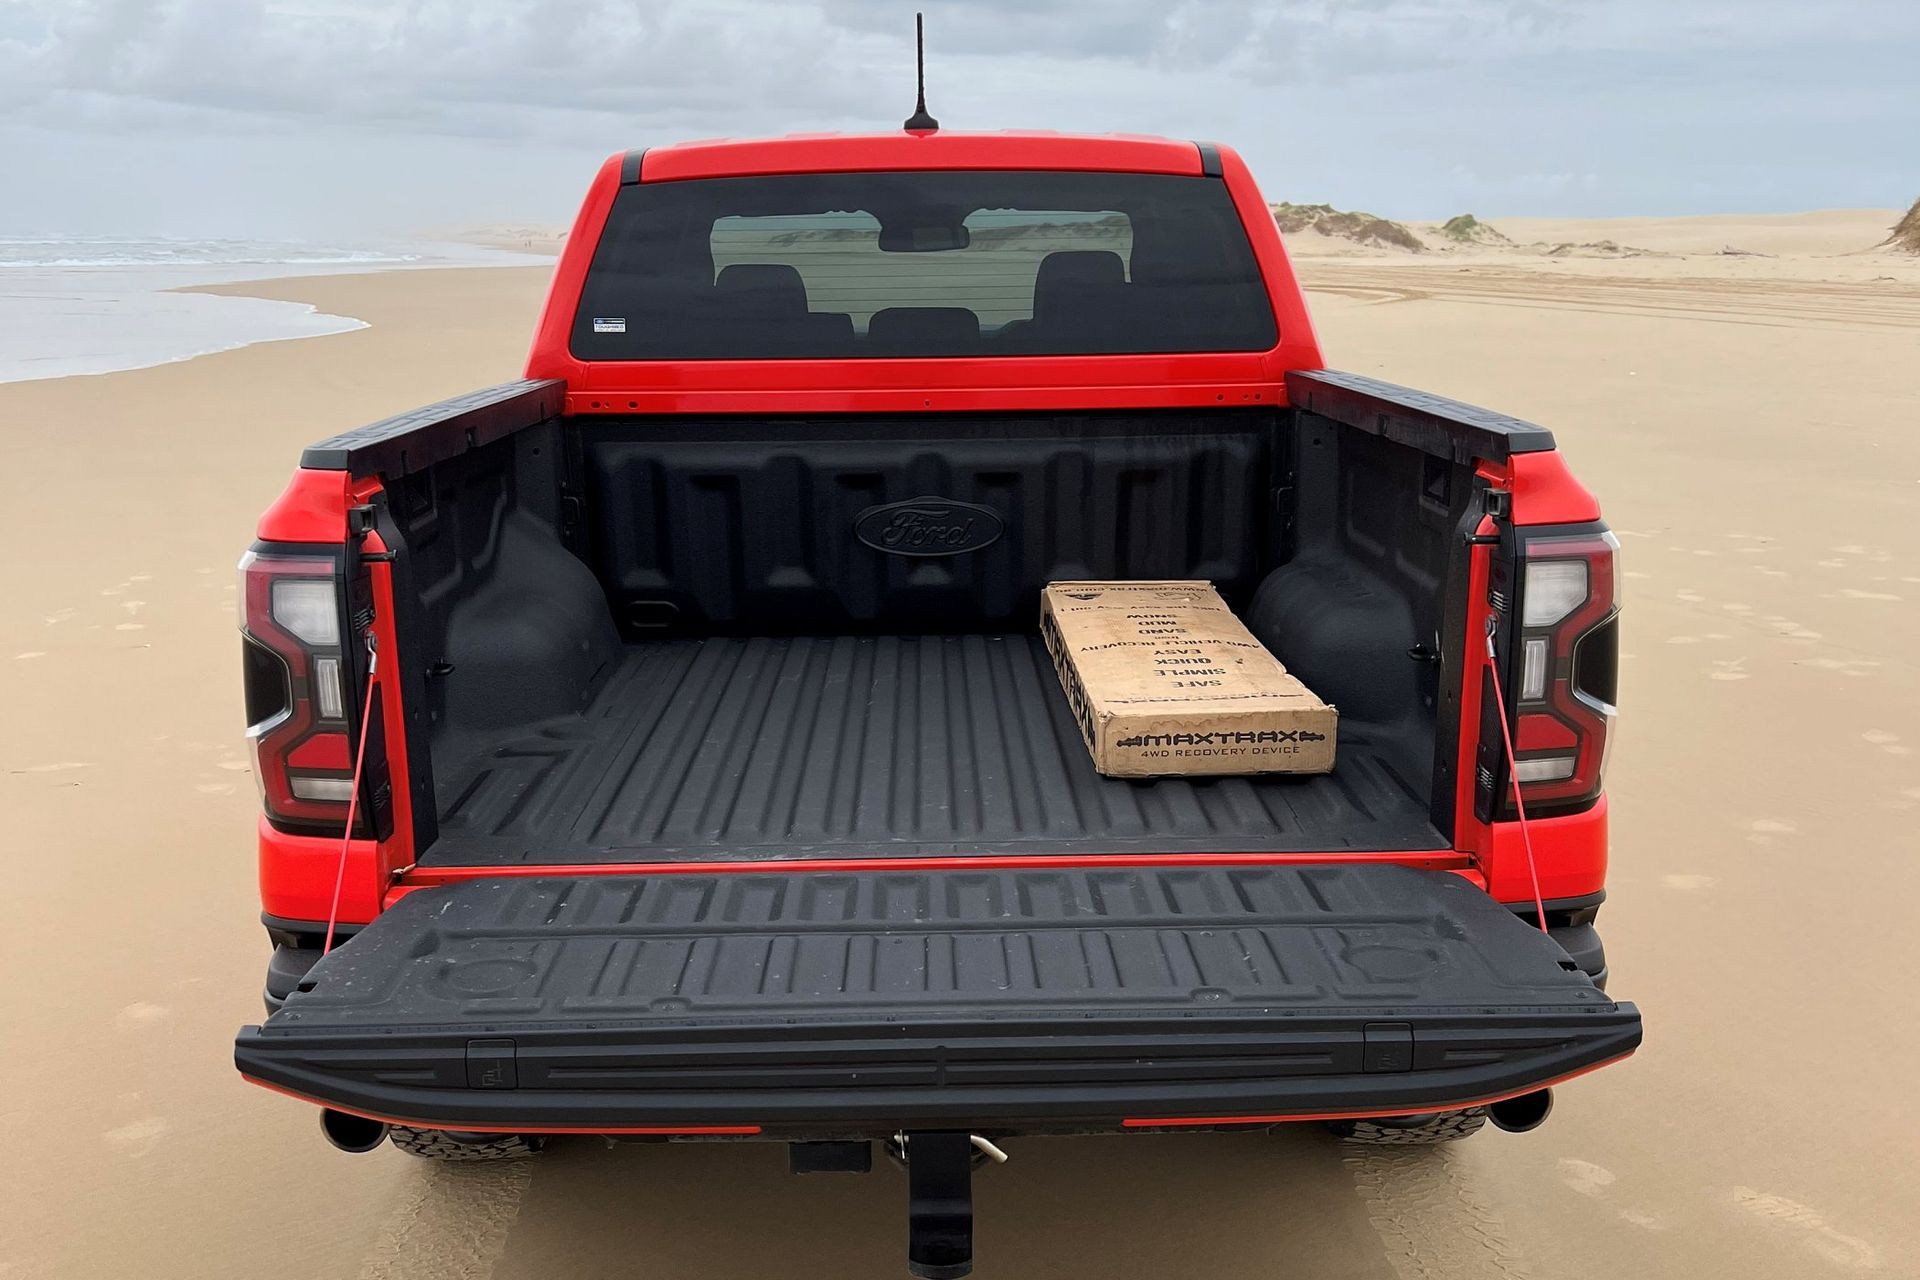 The Ford Raptor offers a wide trunk, making it stand out from other trucks and providing a great option for car rental in Palawan, Philippines.